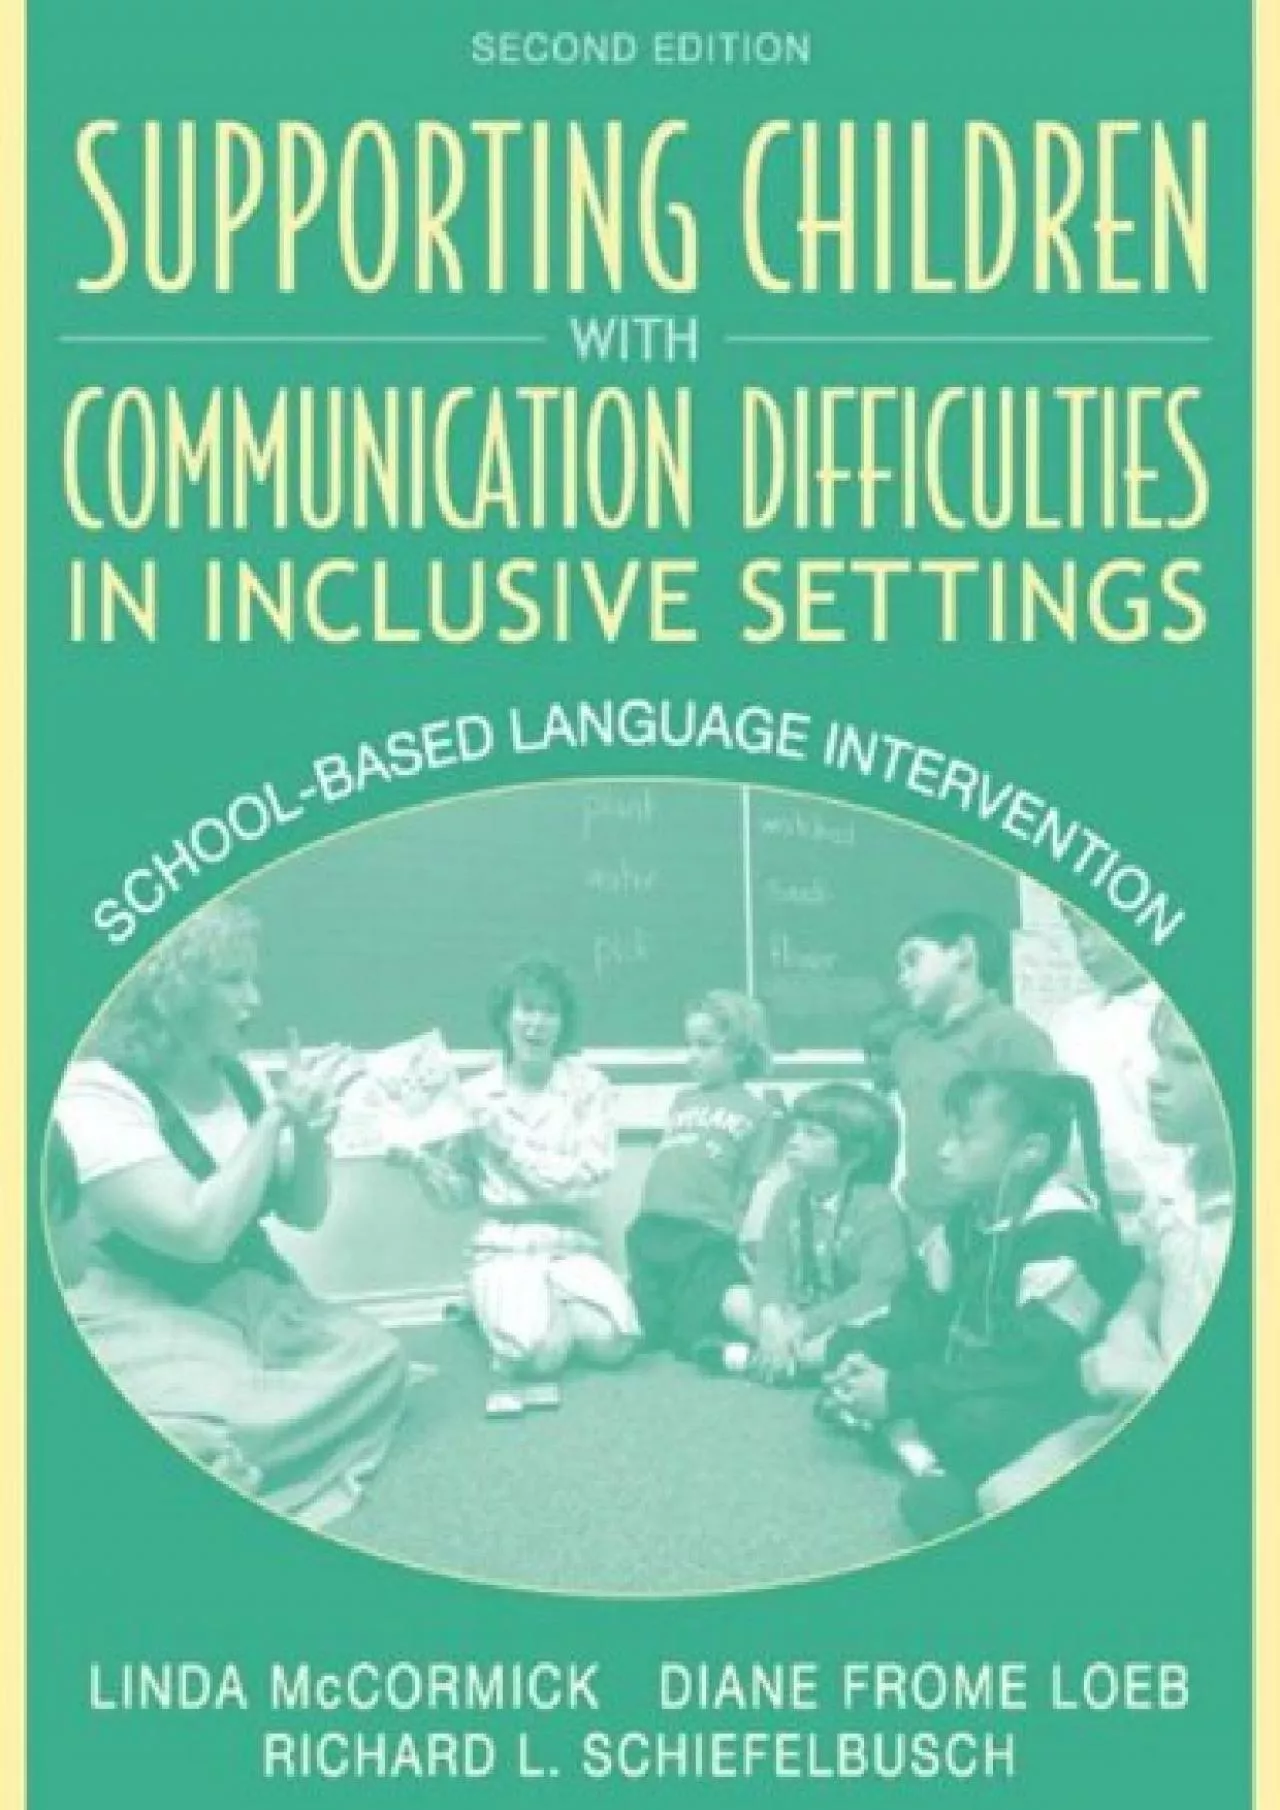 (EBOOK)-Supporting Children with Communication Difficulties in Inclusive Settings: School-Based